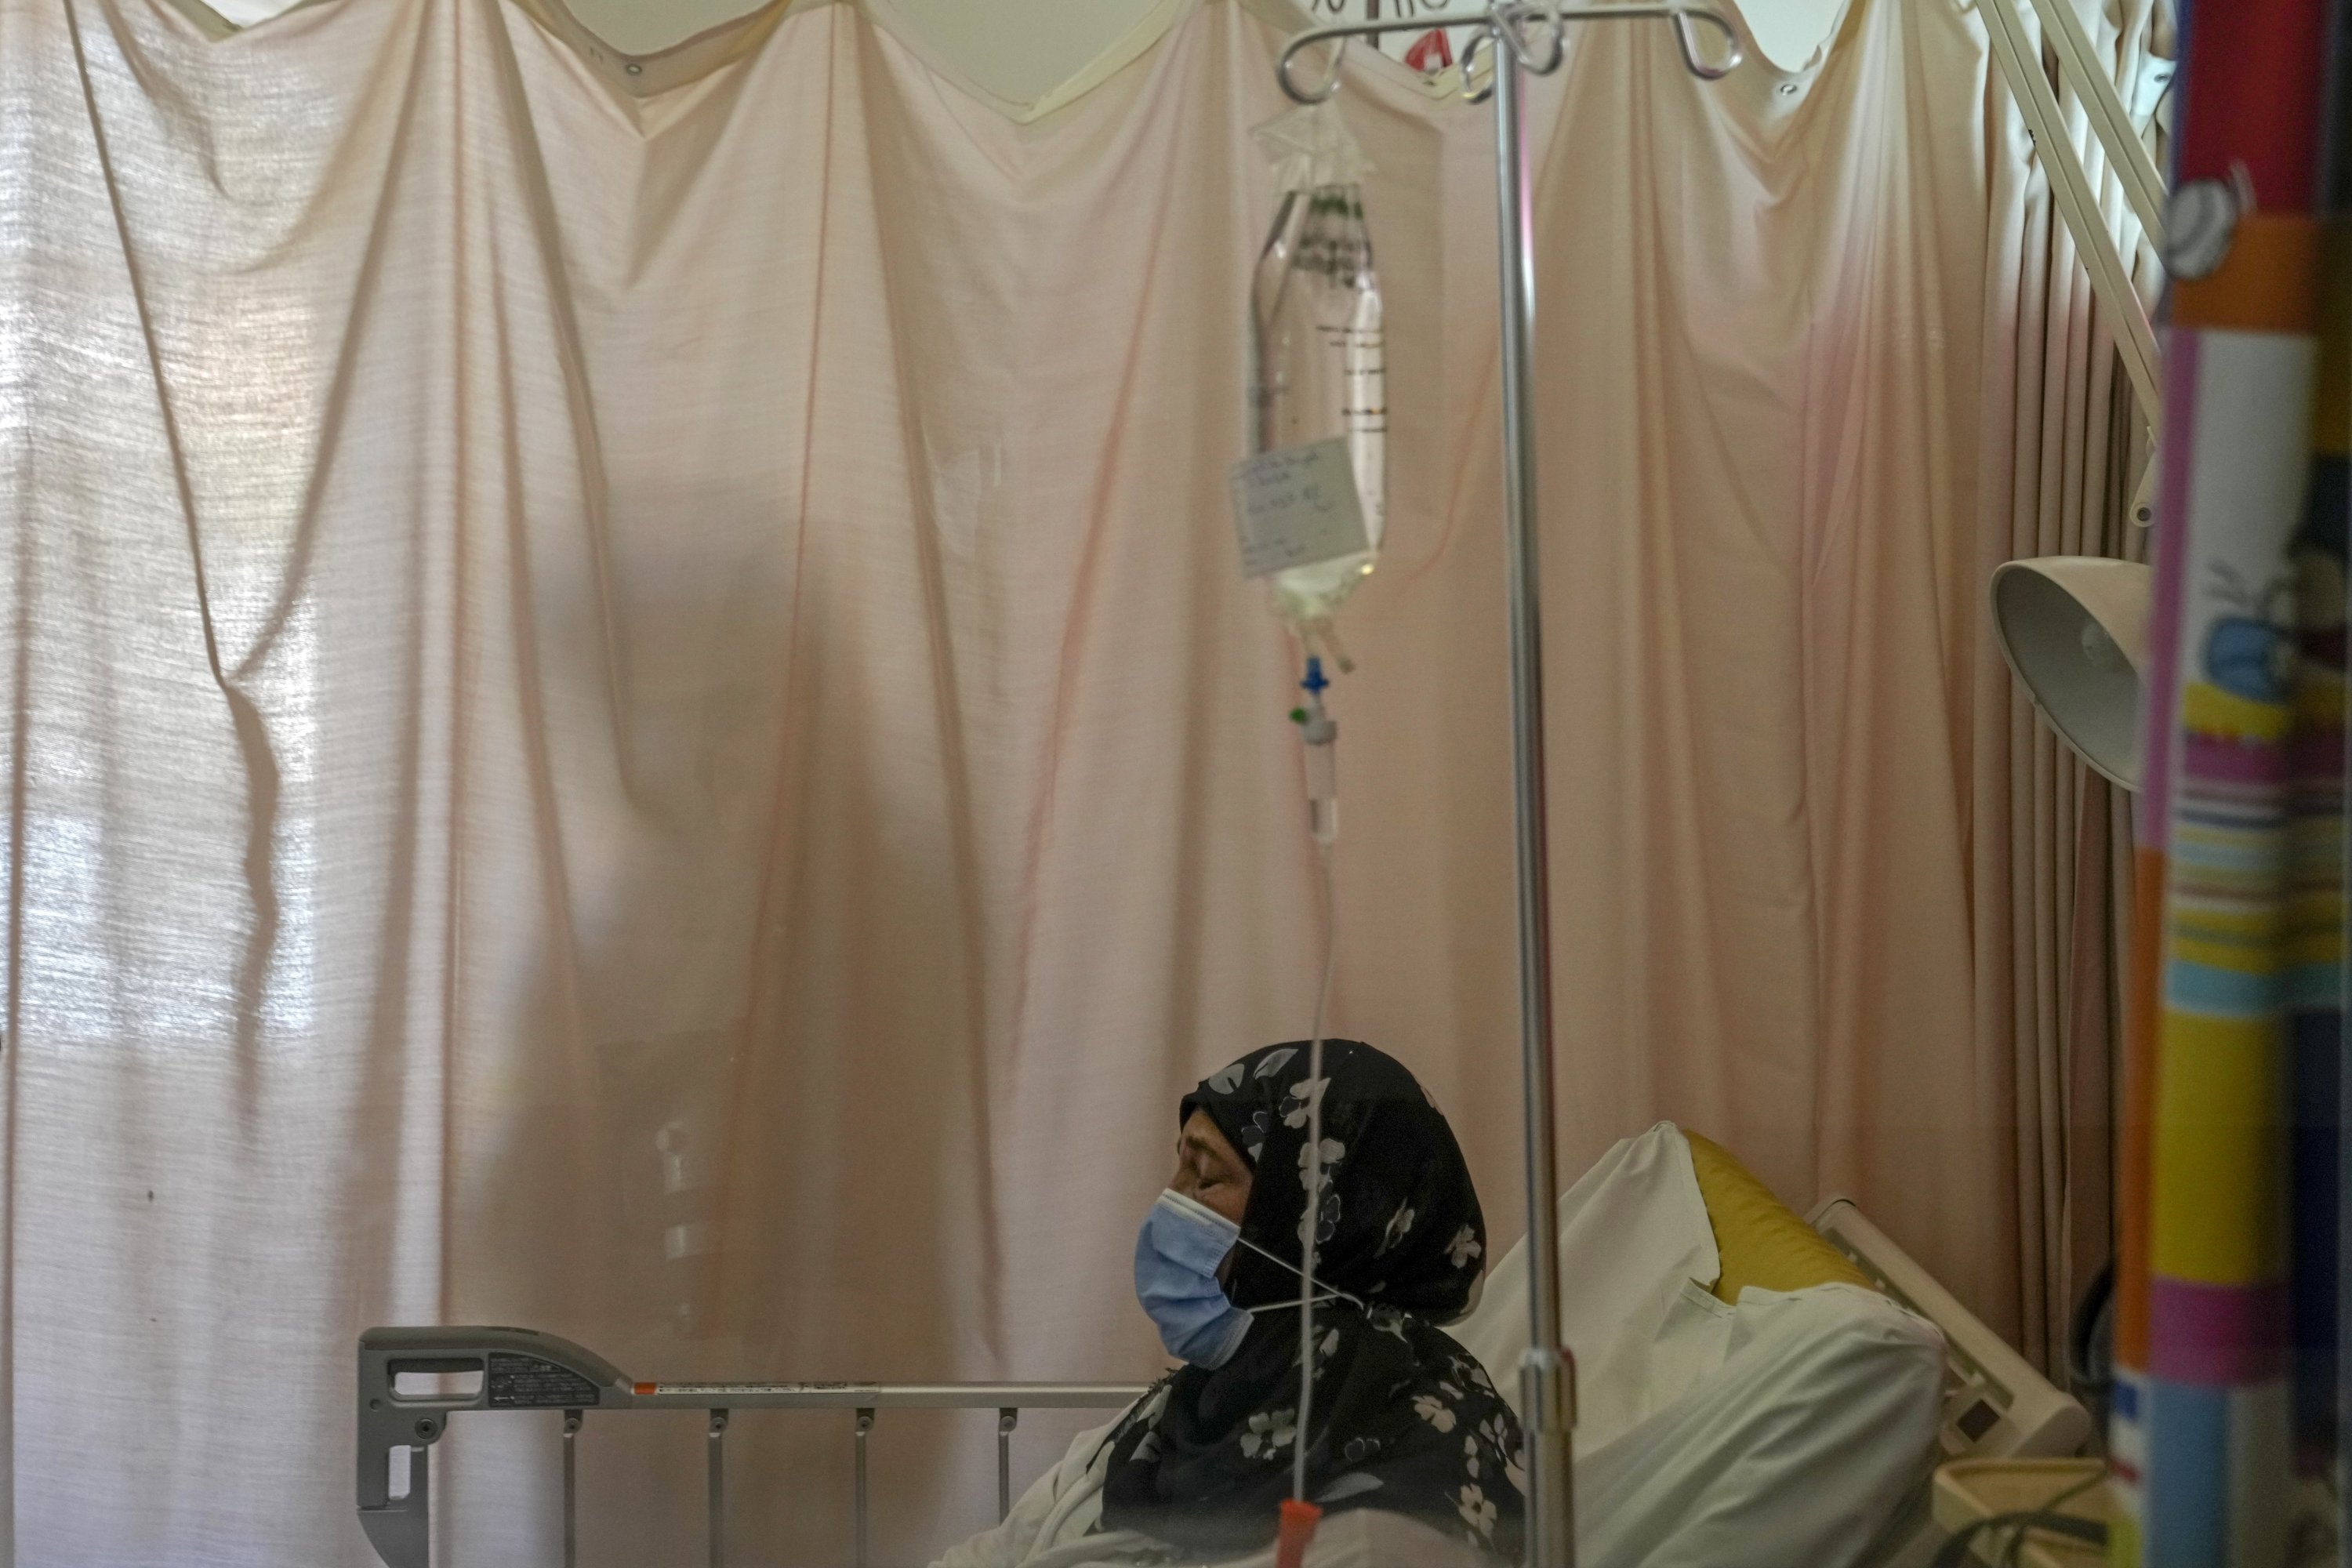 Wahiba Doughan waits to receive chemotherapy treatment for lung cancer at the government-run Rafik Hariri University Hospital in Beirut, Lebanon, Sept. 8, 2021. (AP Photo)